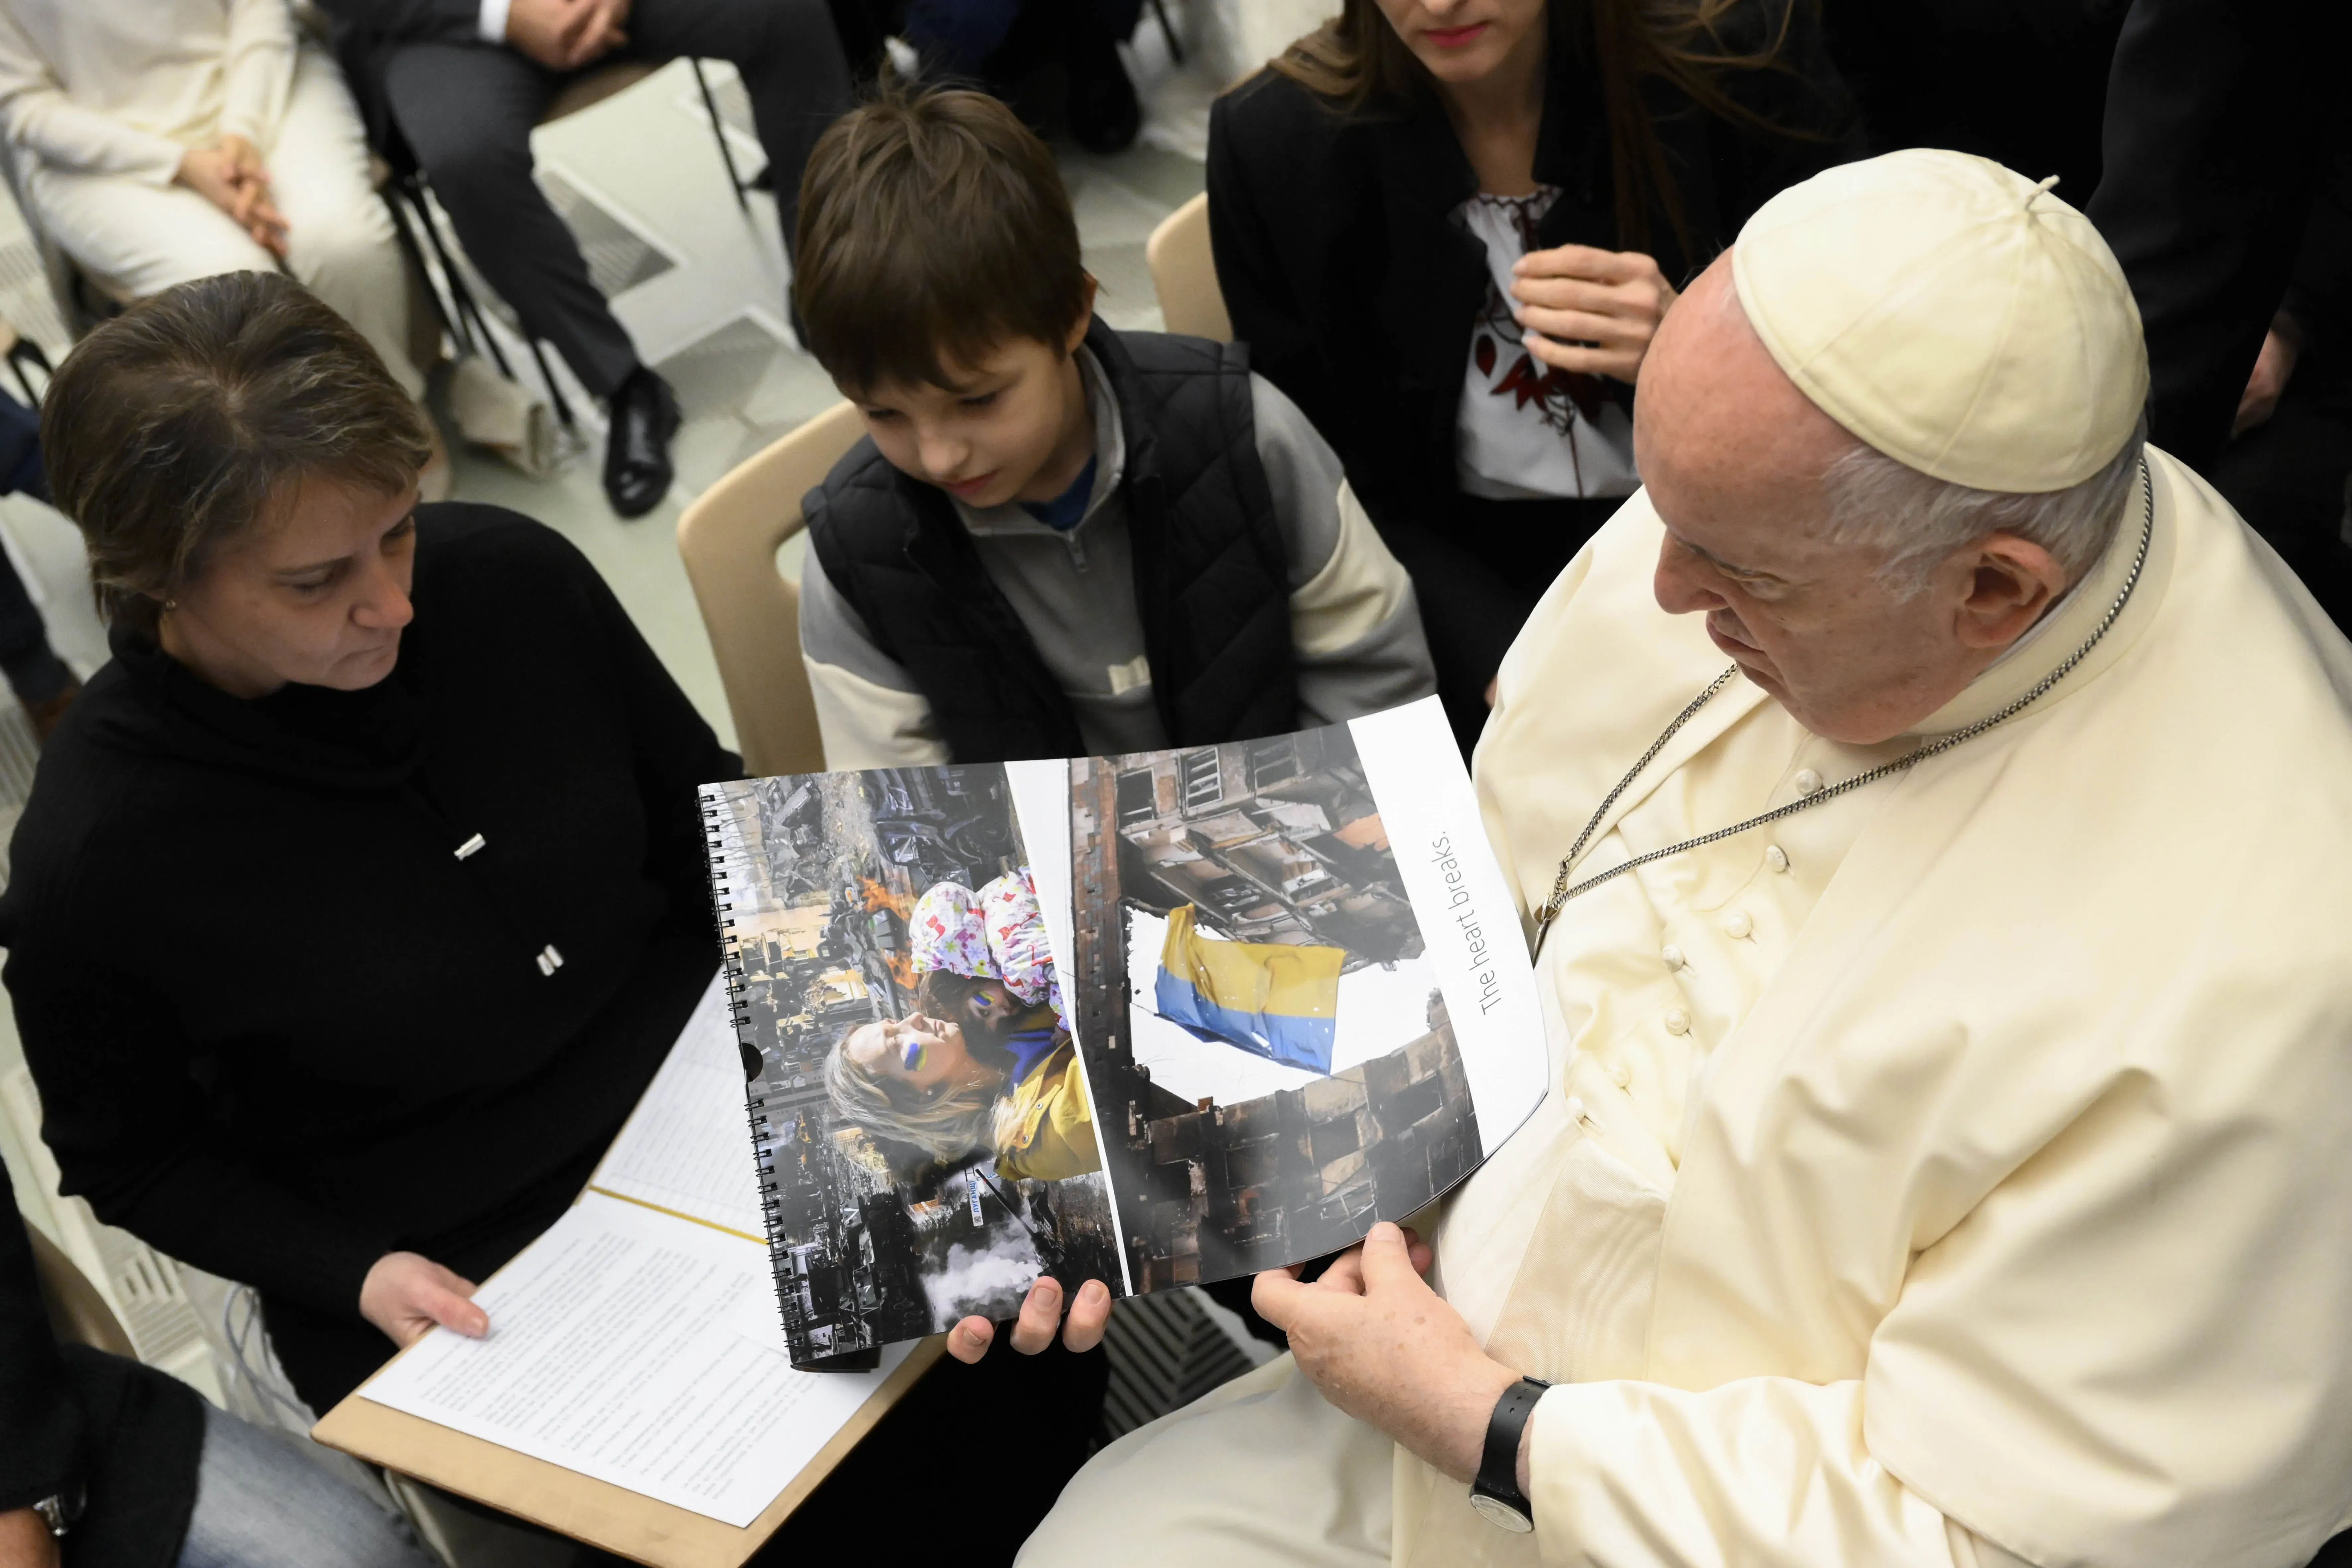 Pope Francis looking at images from Ukraine at the general audience, Dec. 21, 2022 | Vatican Media